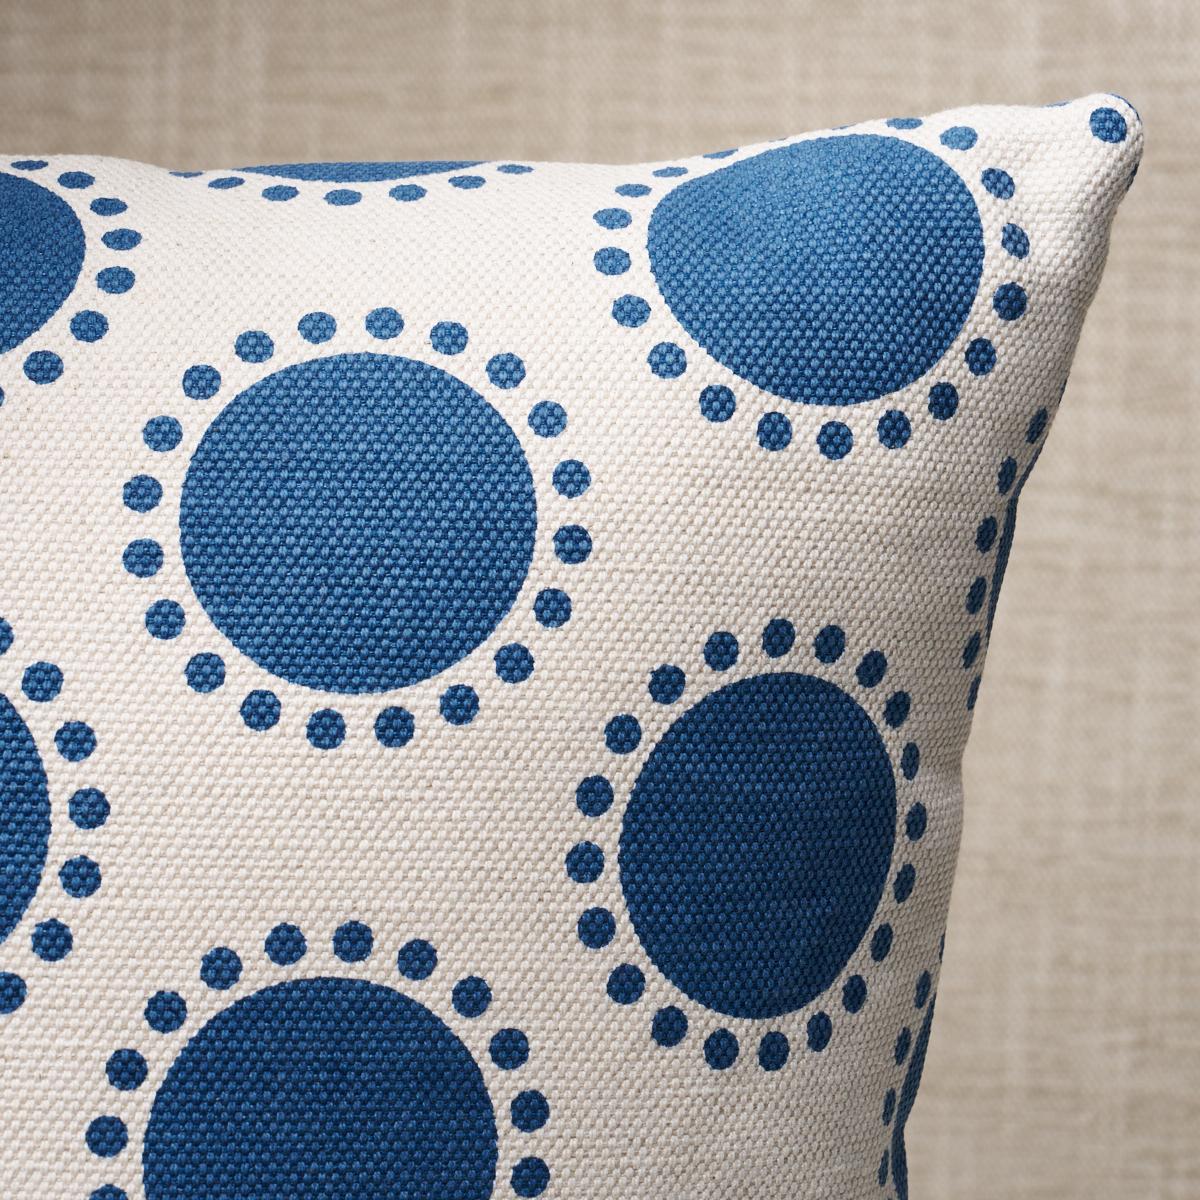 This pillow features Oompa by Studio Bon with a knife edge finish. With graphic offset polka dots encircled by diminutive dot details, Oompa is a playful, modern design by Studio Bon. Pillow includes a feather/down fill insert and hidden zipper